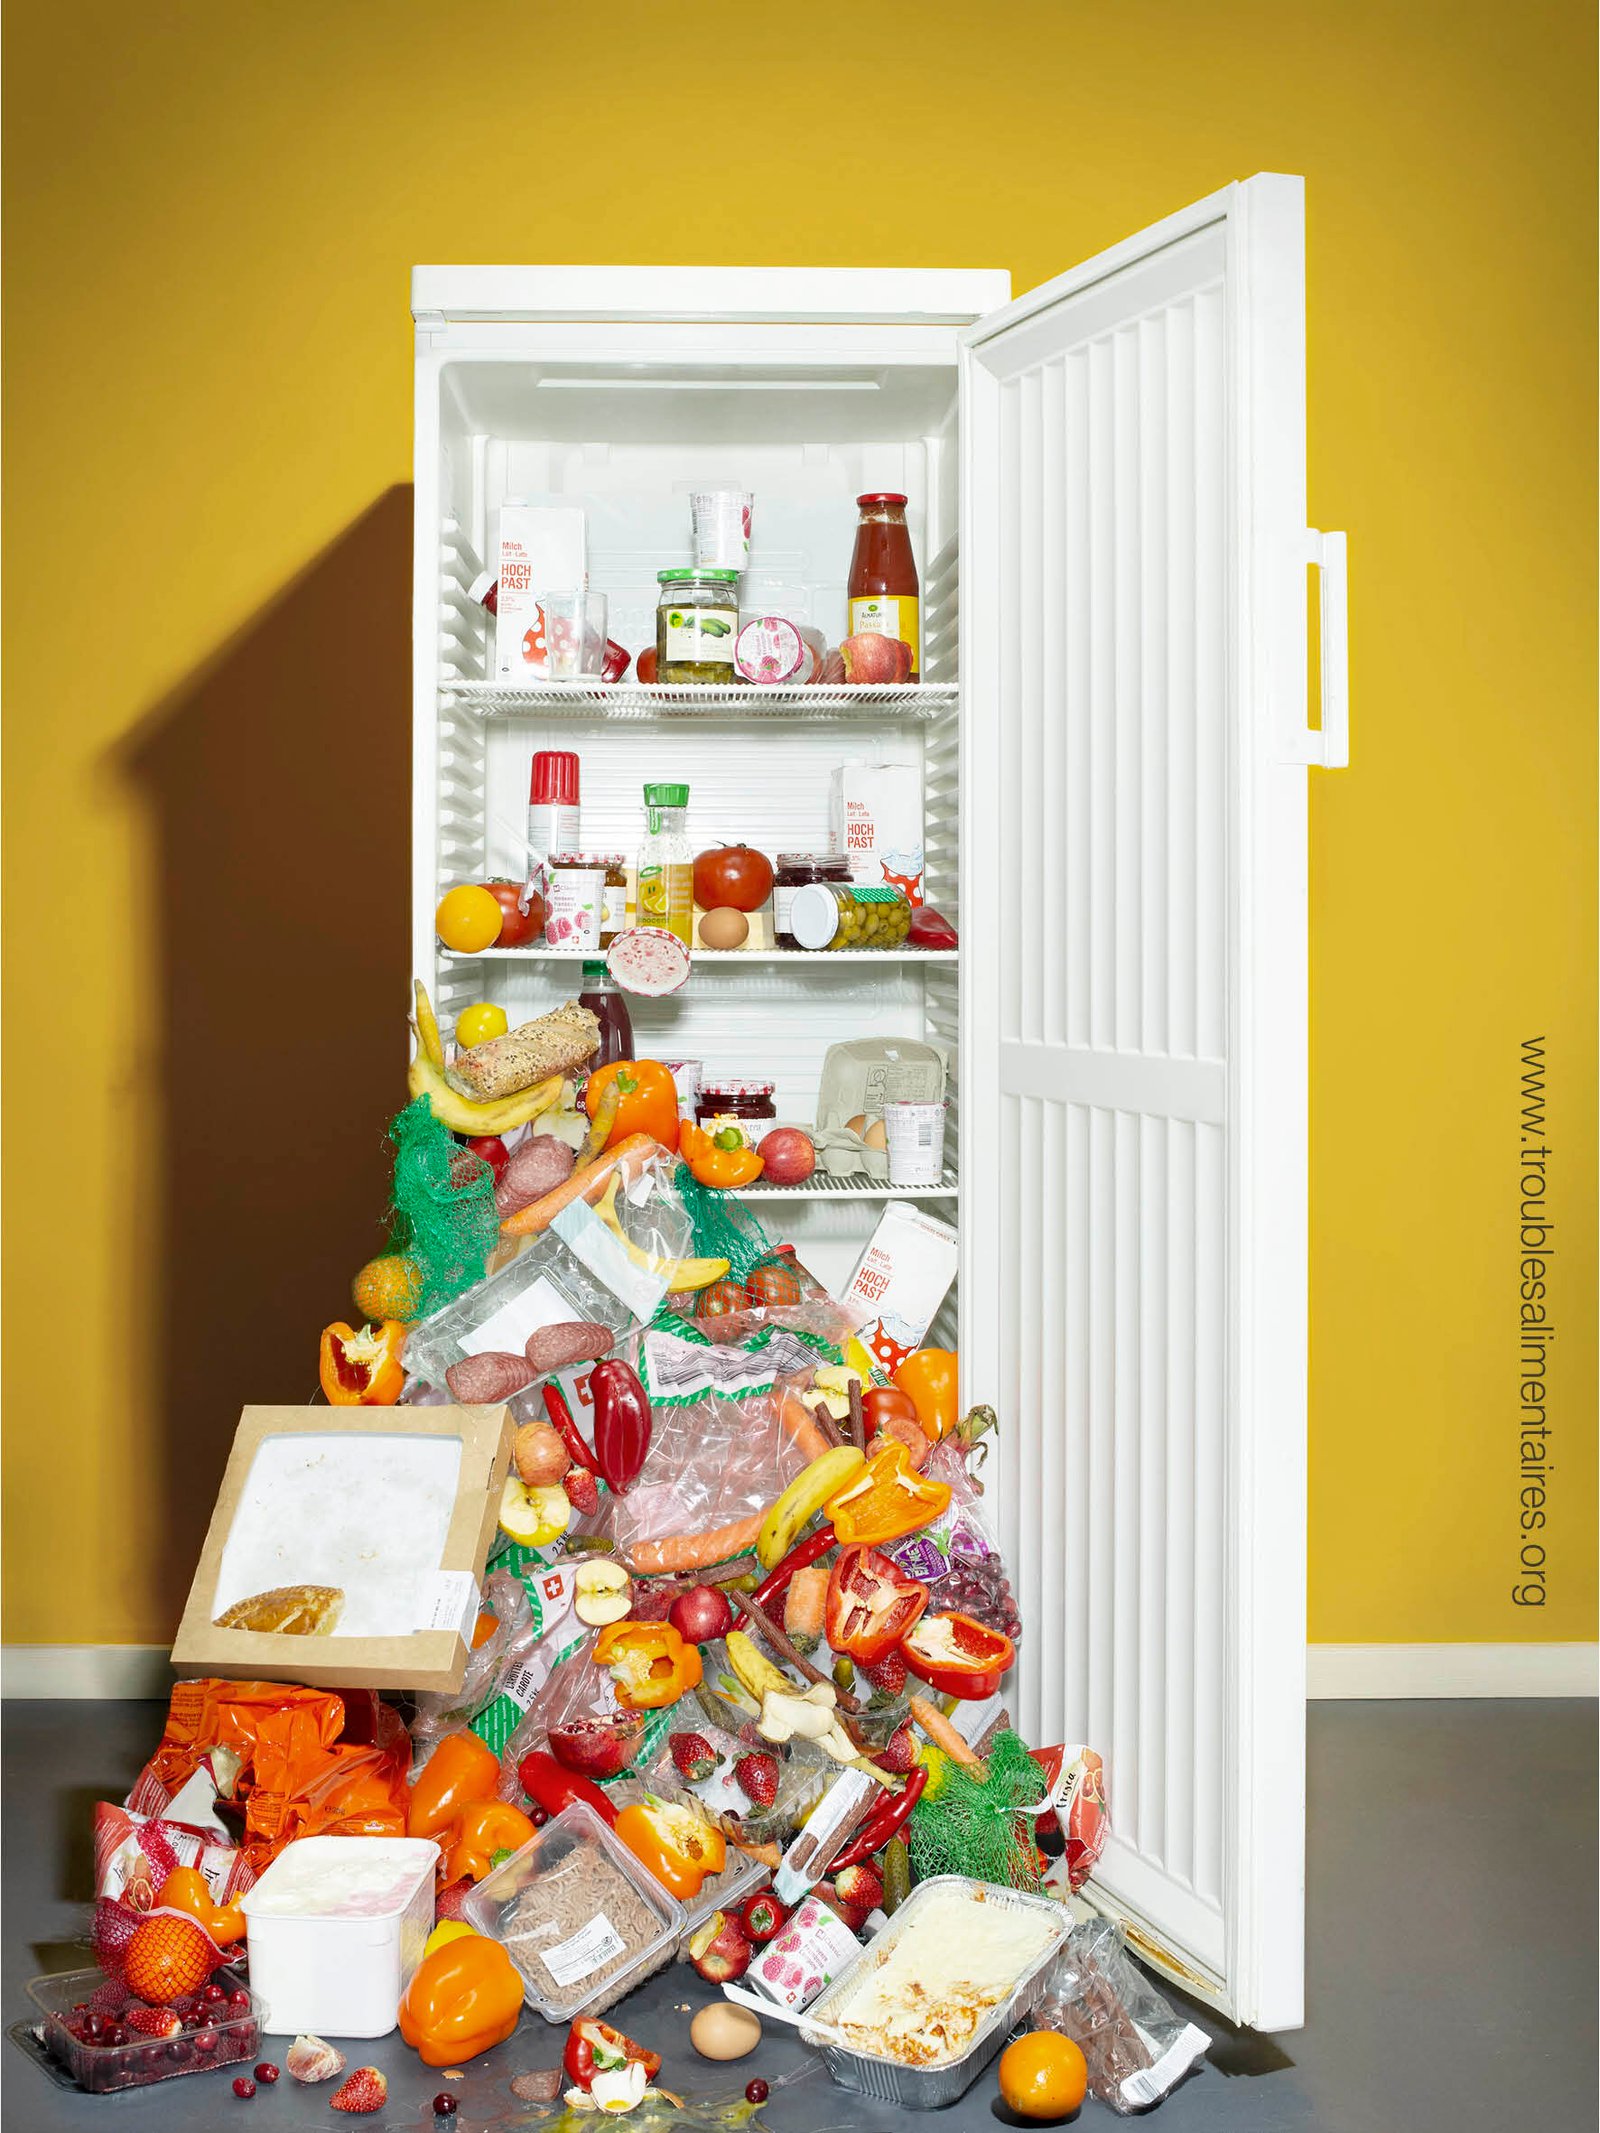 EATING DISORDERS CAMPAIGN Image